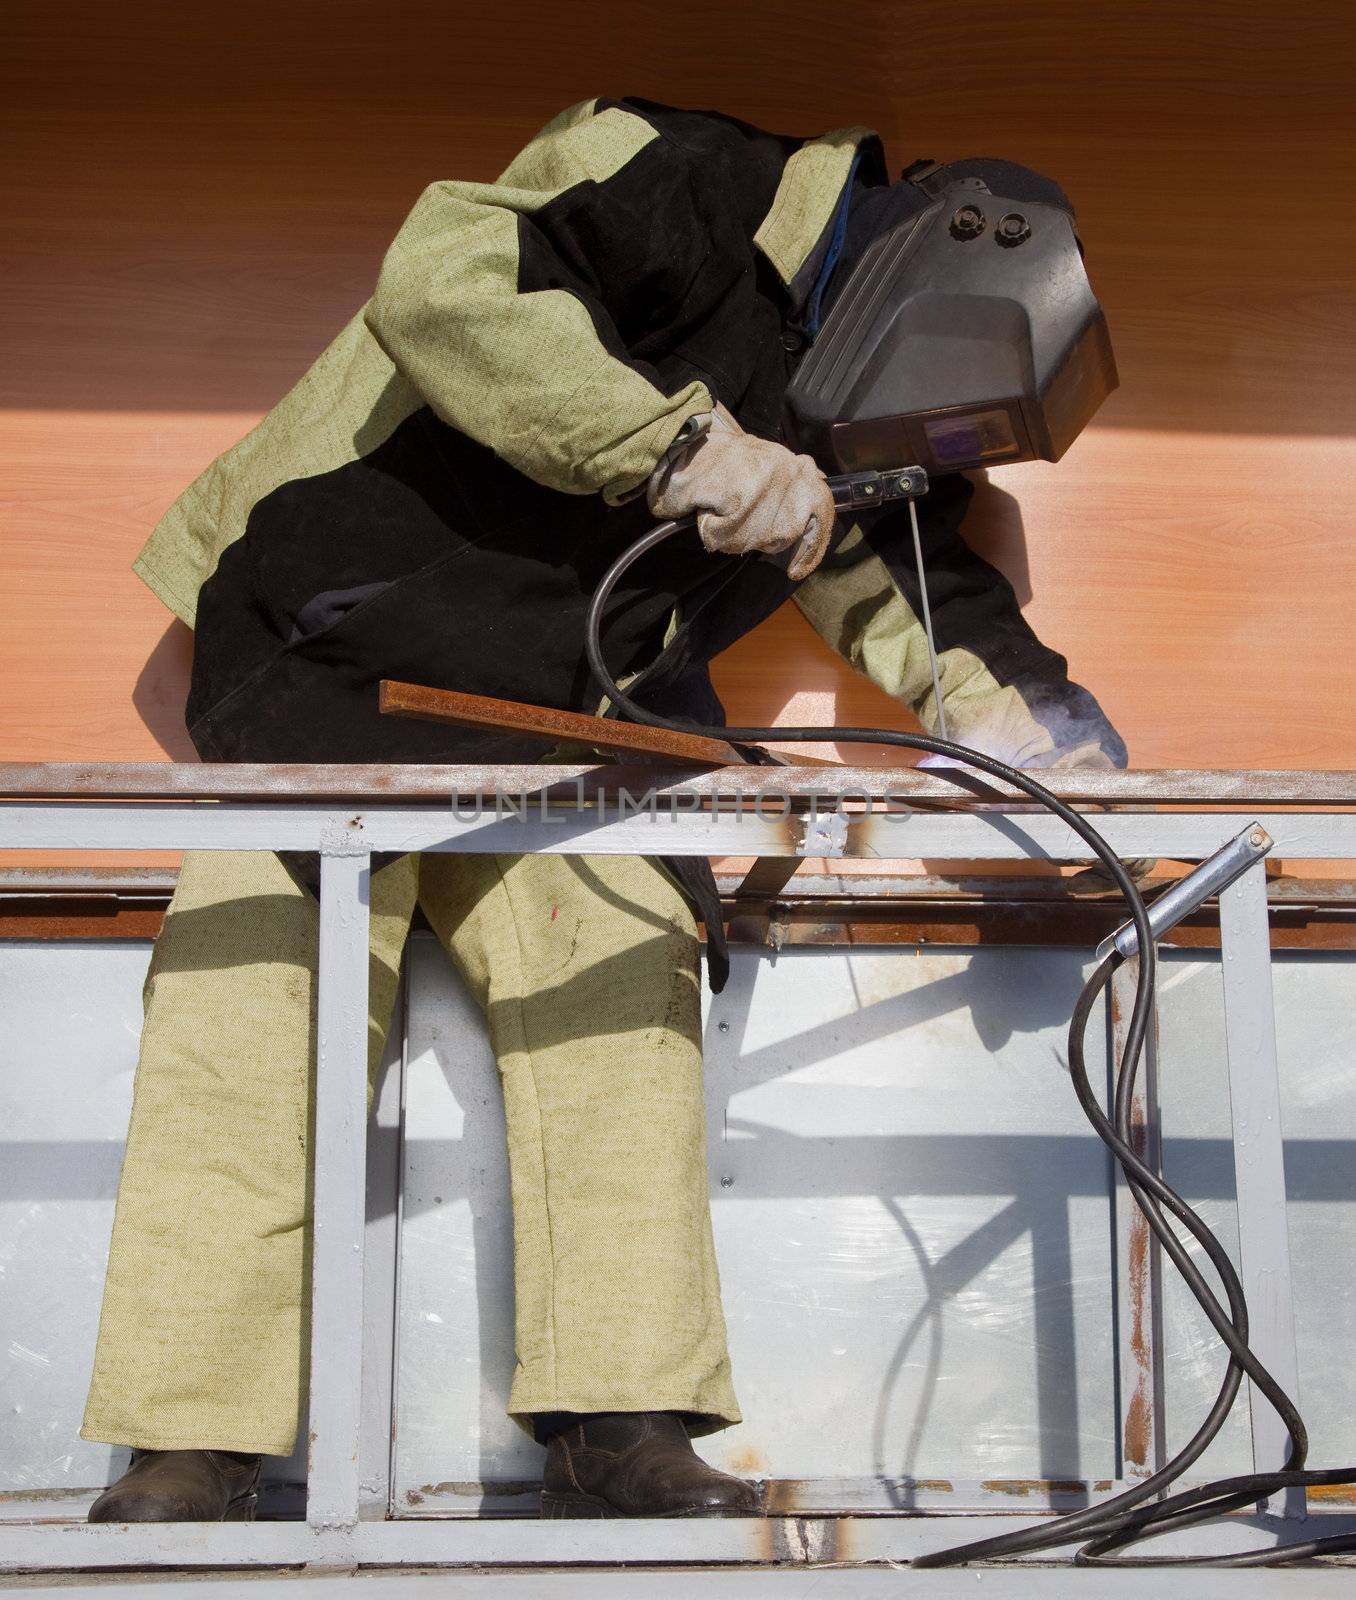 Welder in a special suit, while working in direct sunlight